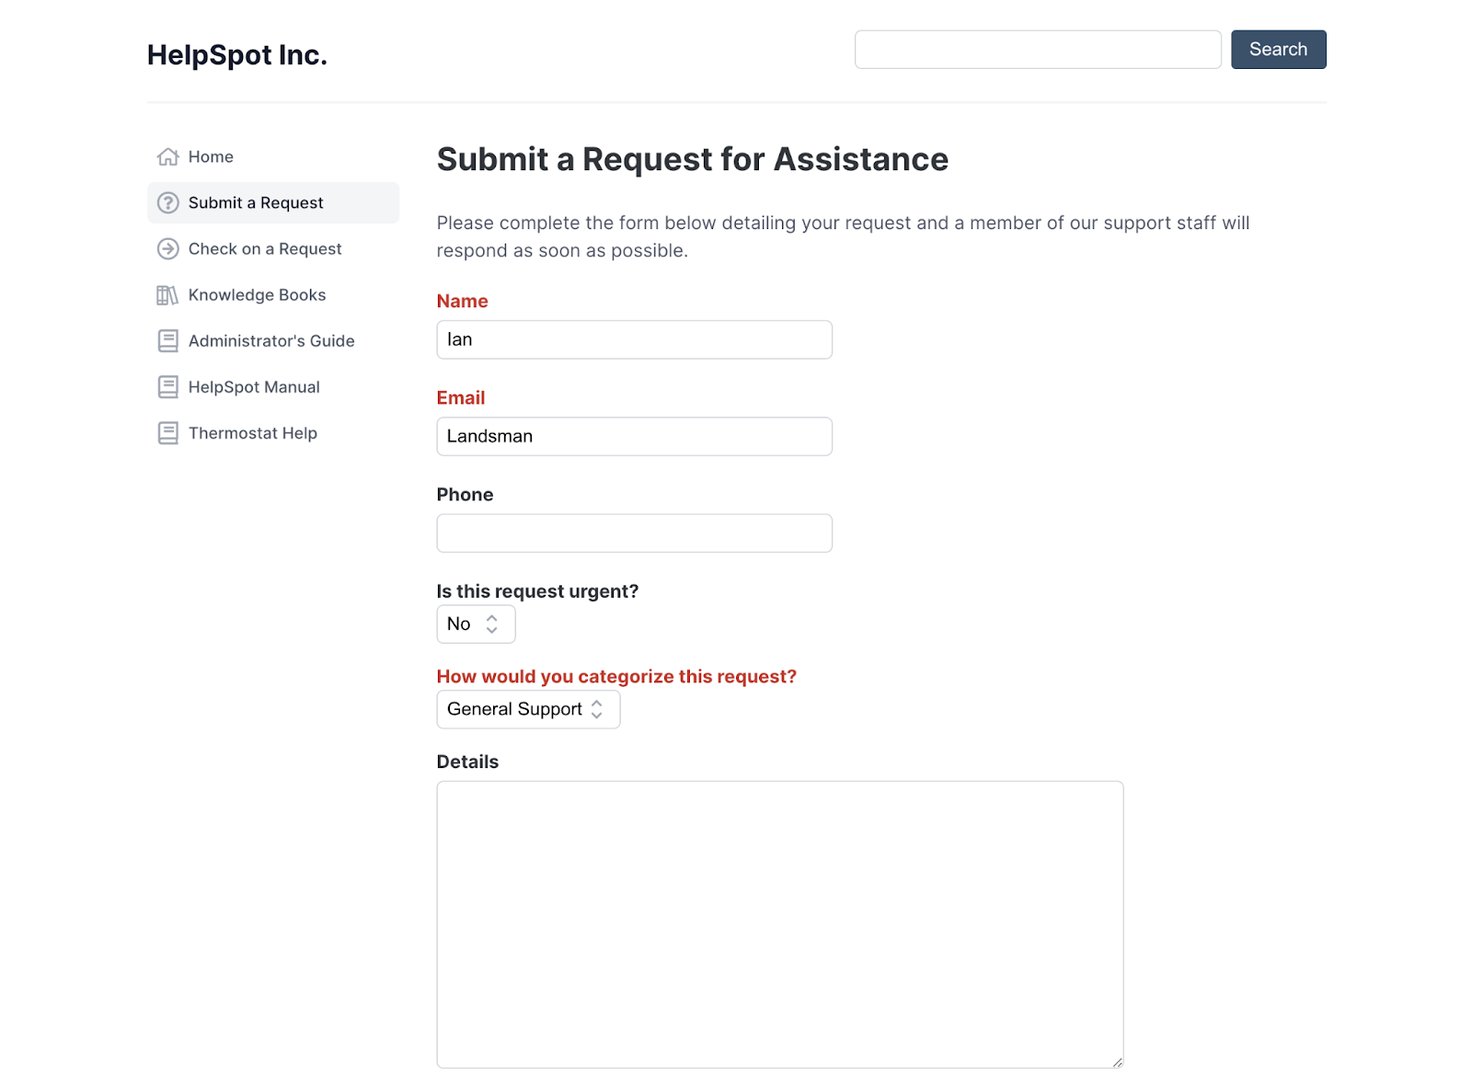 Submitting a Ticket with HelpSpot